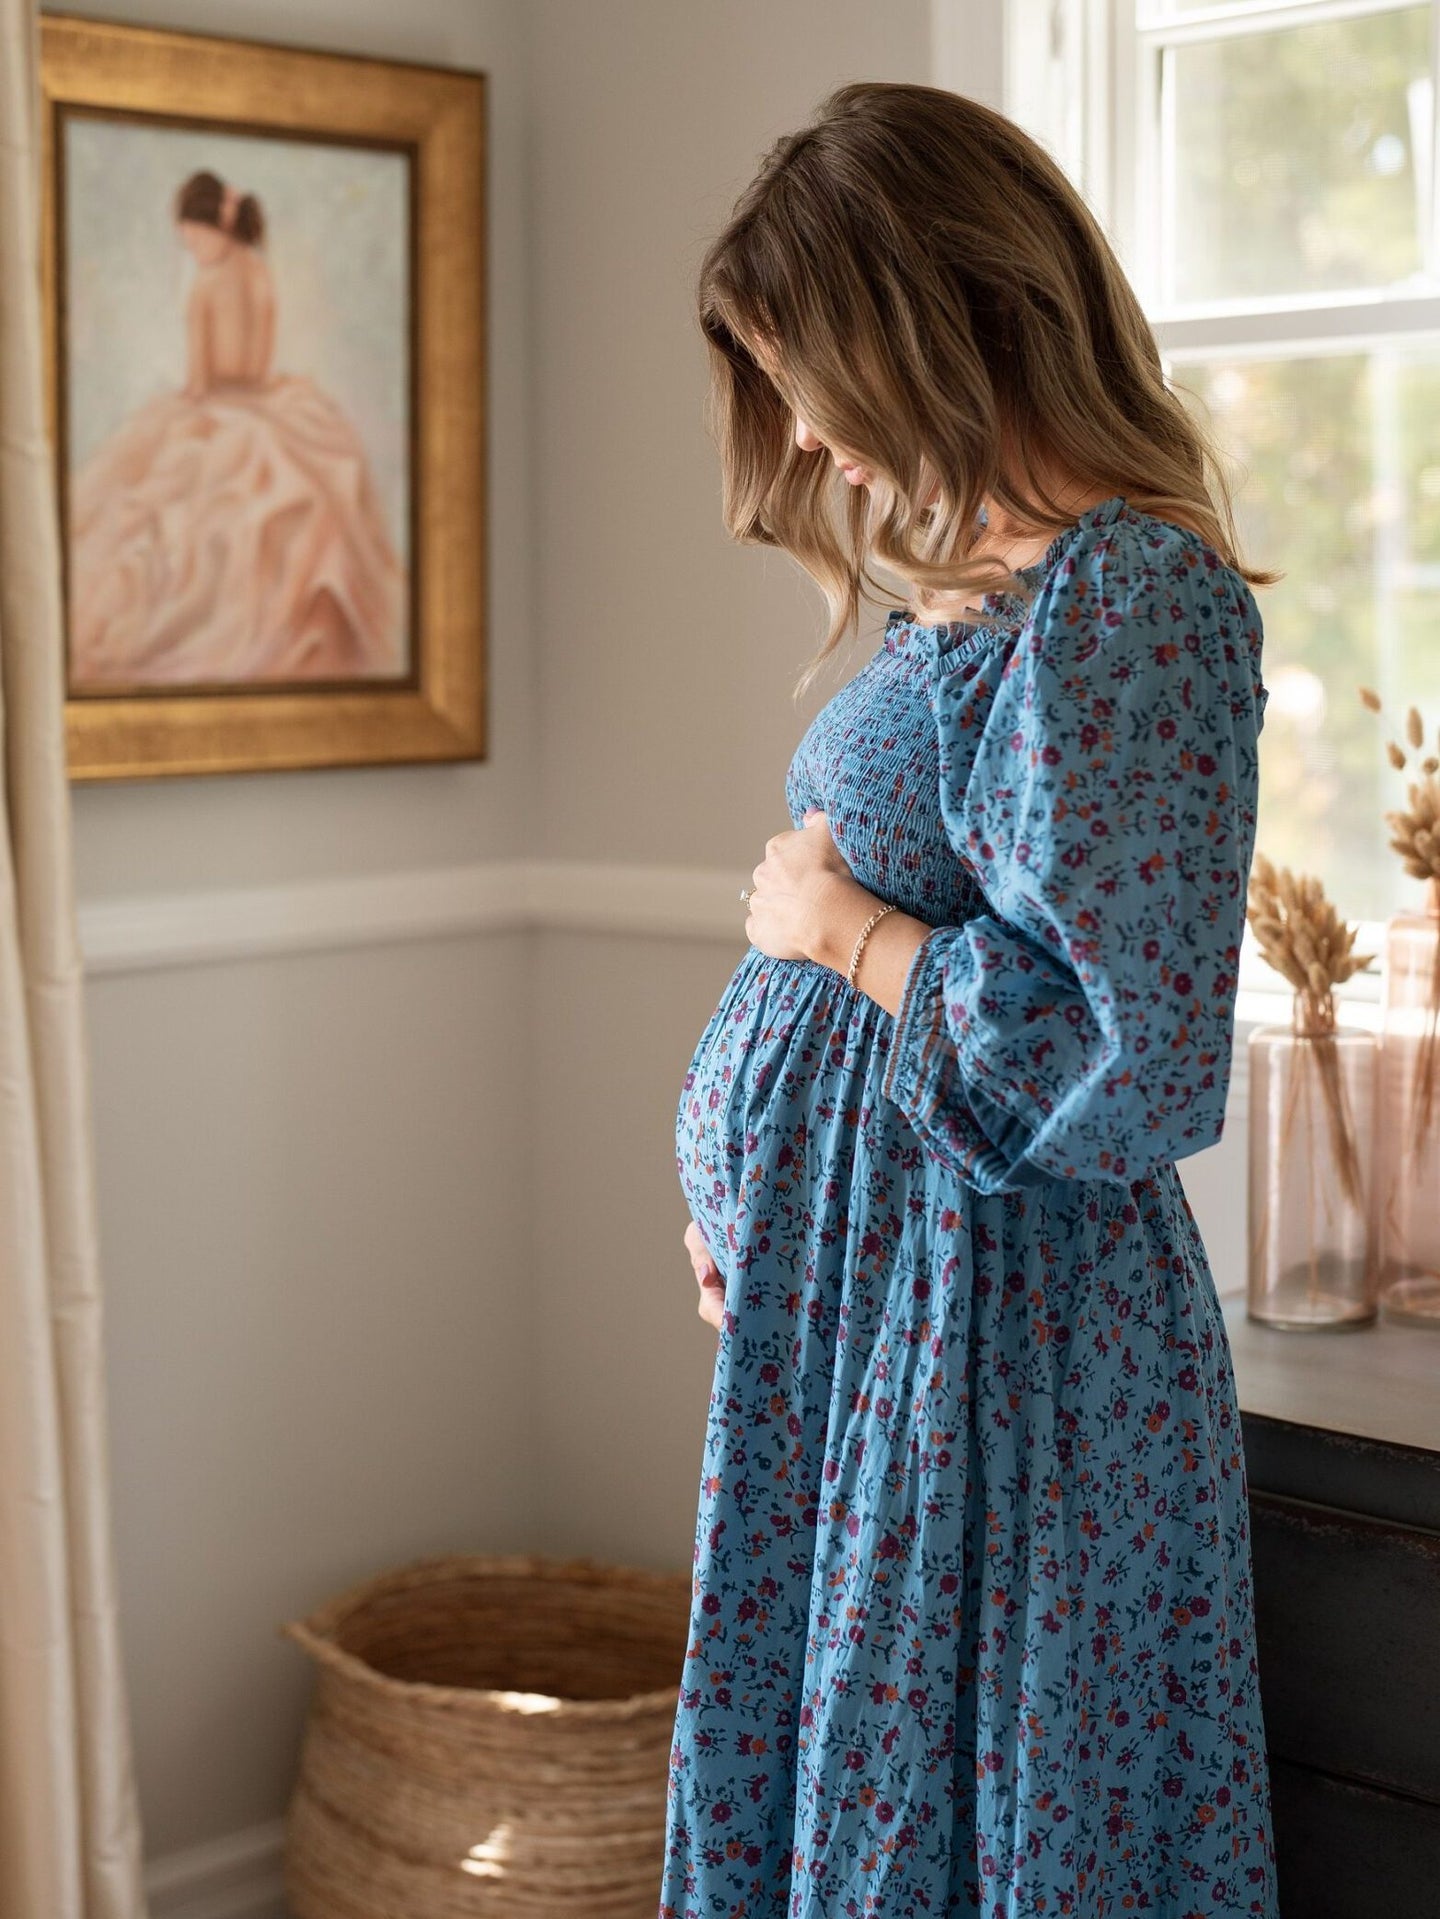 Gestational Diabetes: What You Need To Know From A Nutrition Perspective